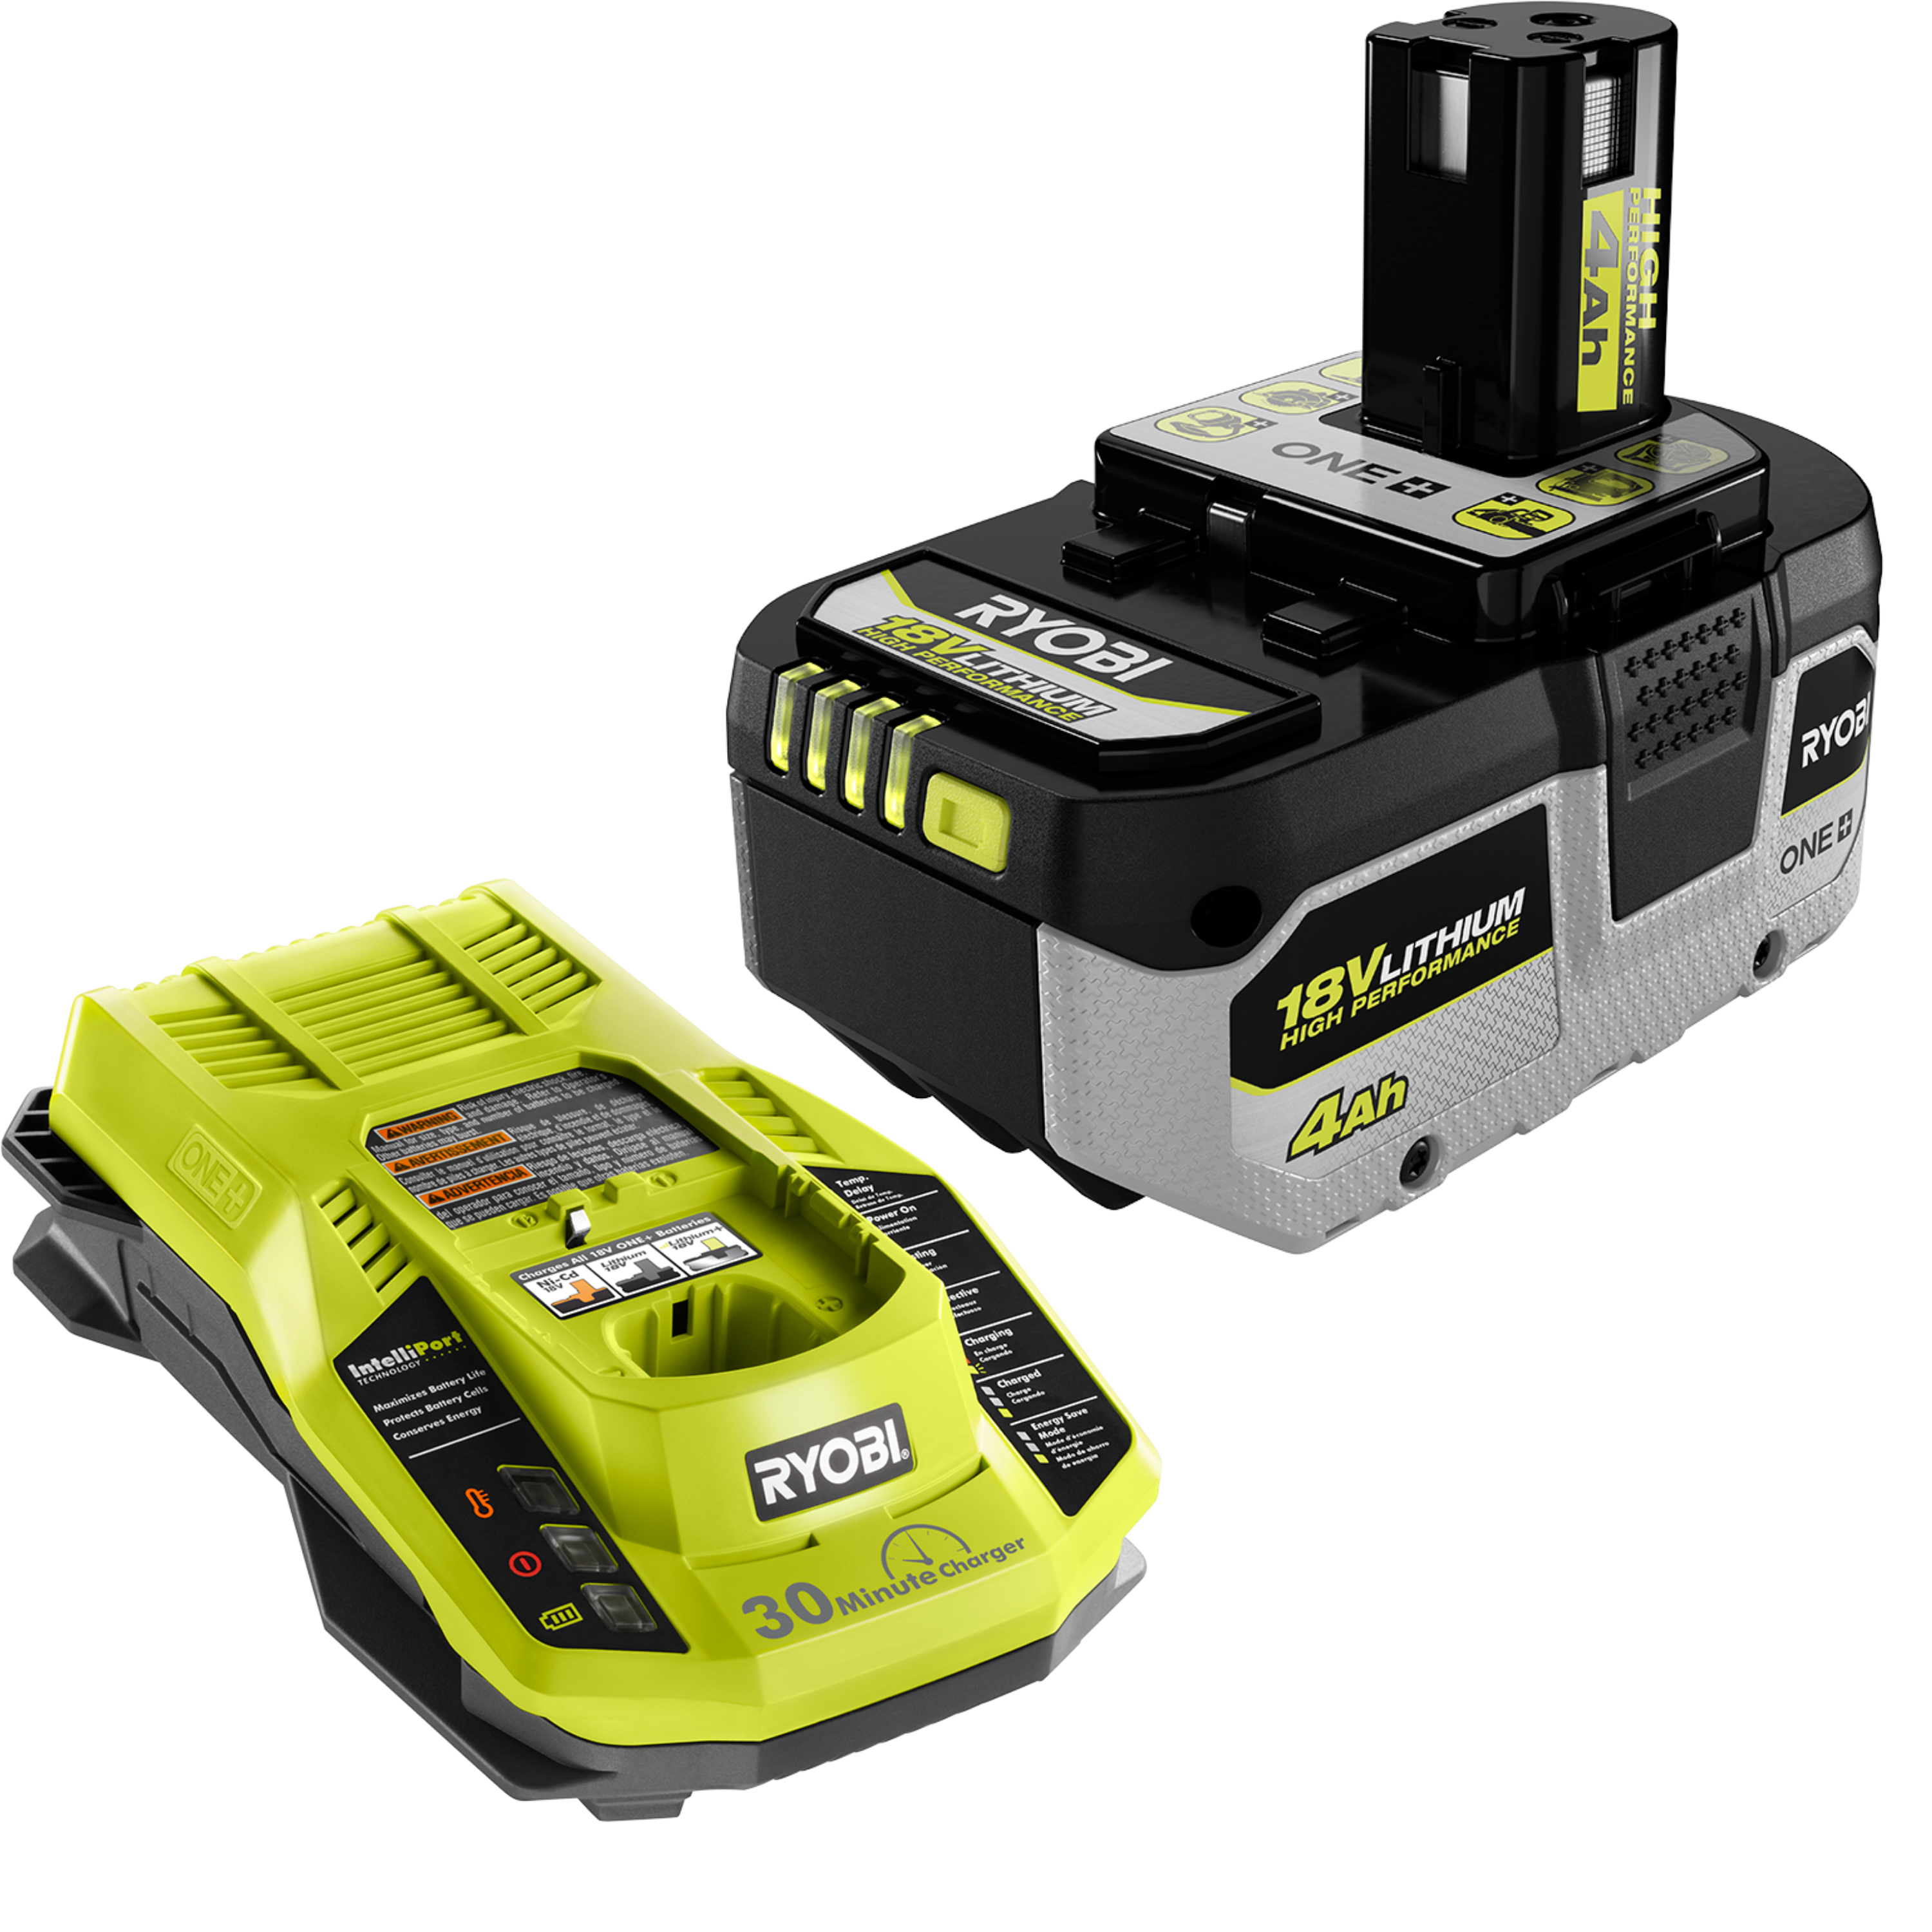 18V ONE+ 4AH LITHIUM HIGH PERFORMANCE BATTERY AND CHARGER STARTER KIT